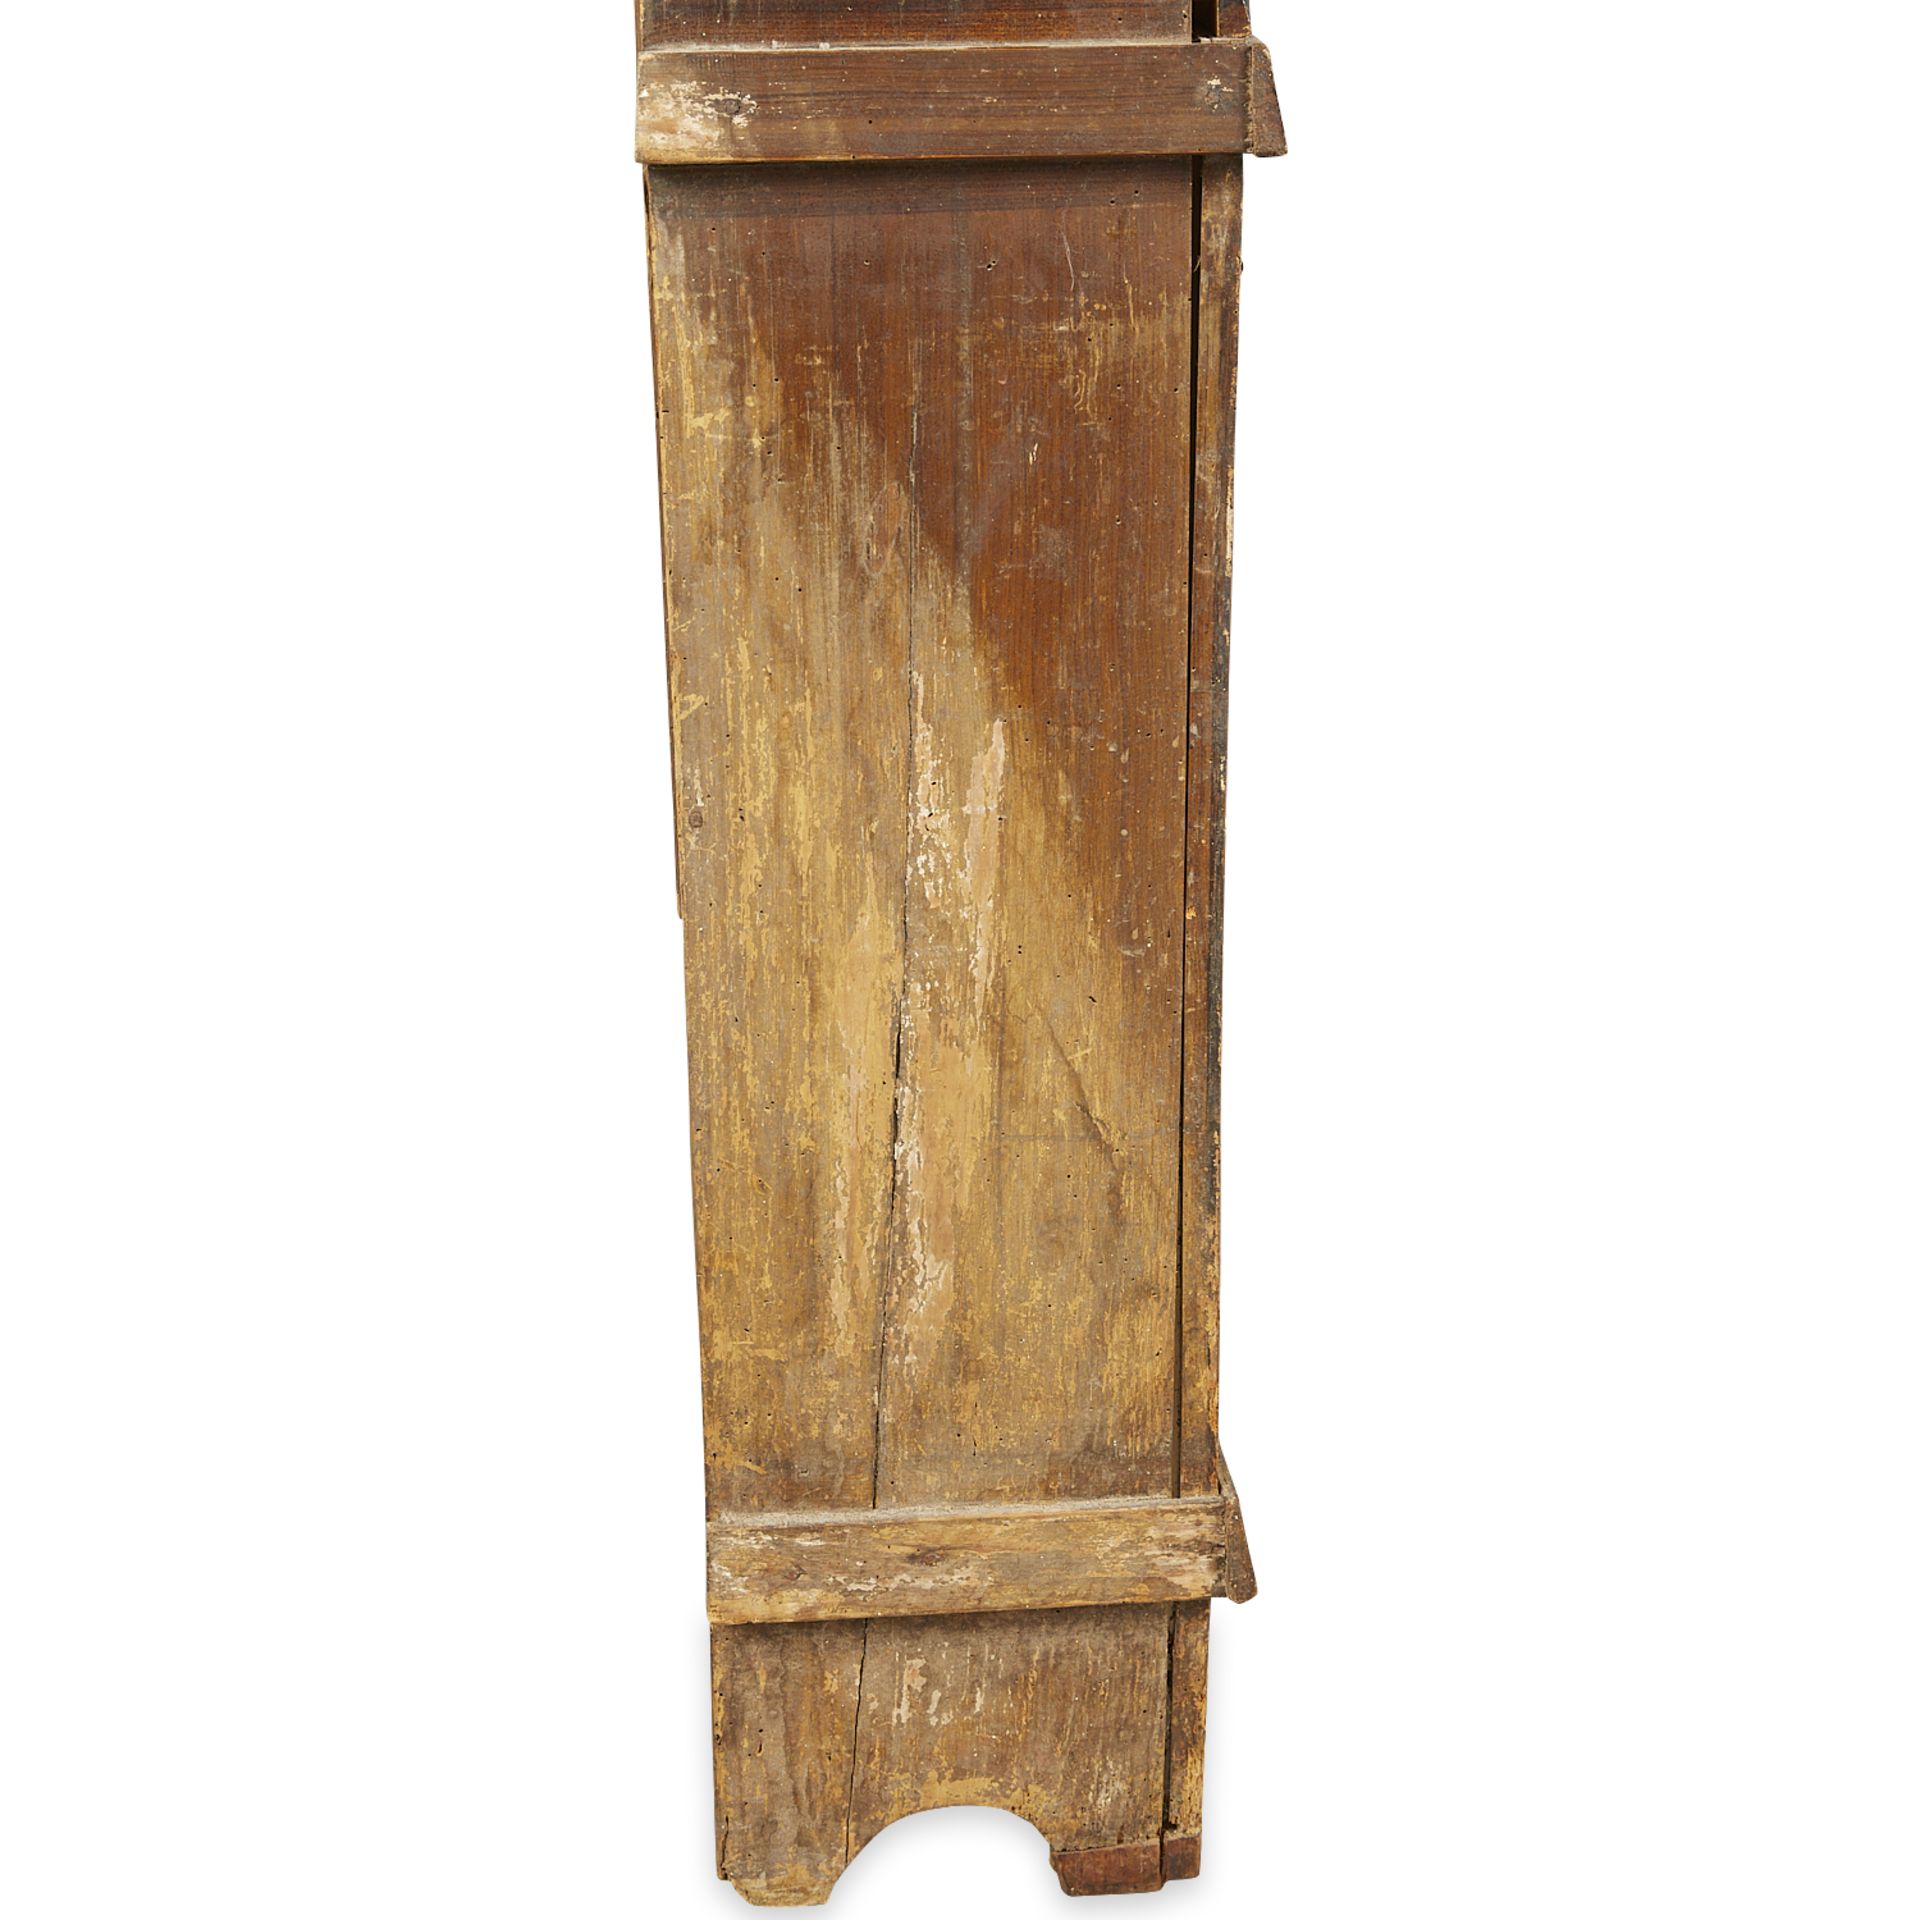 Delarue French Country Painted Grandfather Clock - Image 9 of 22